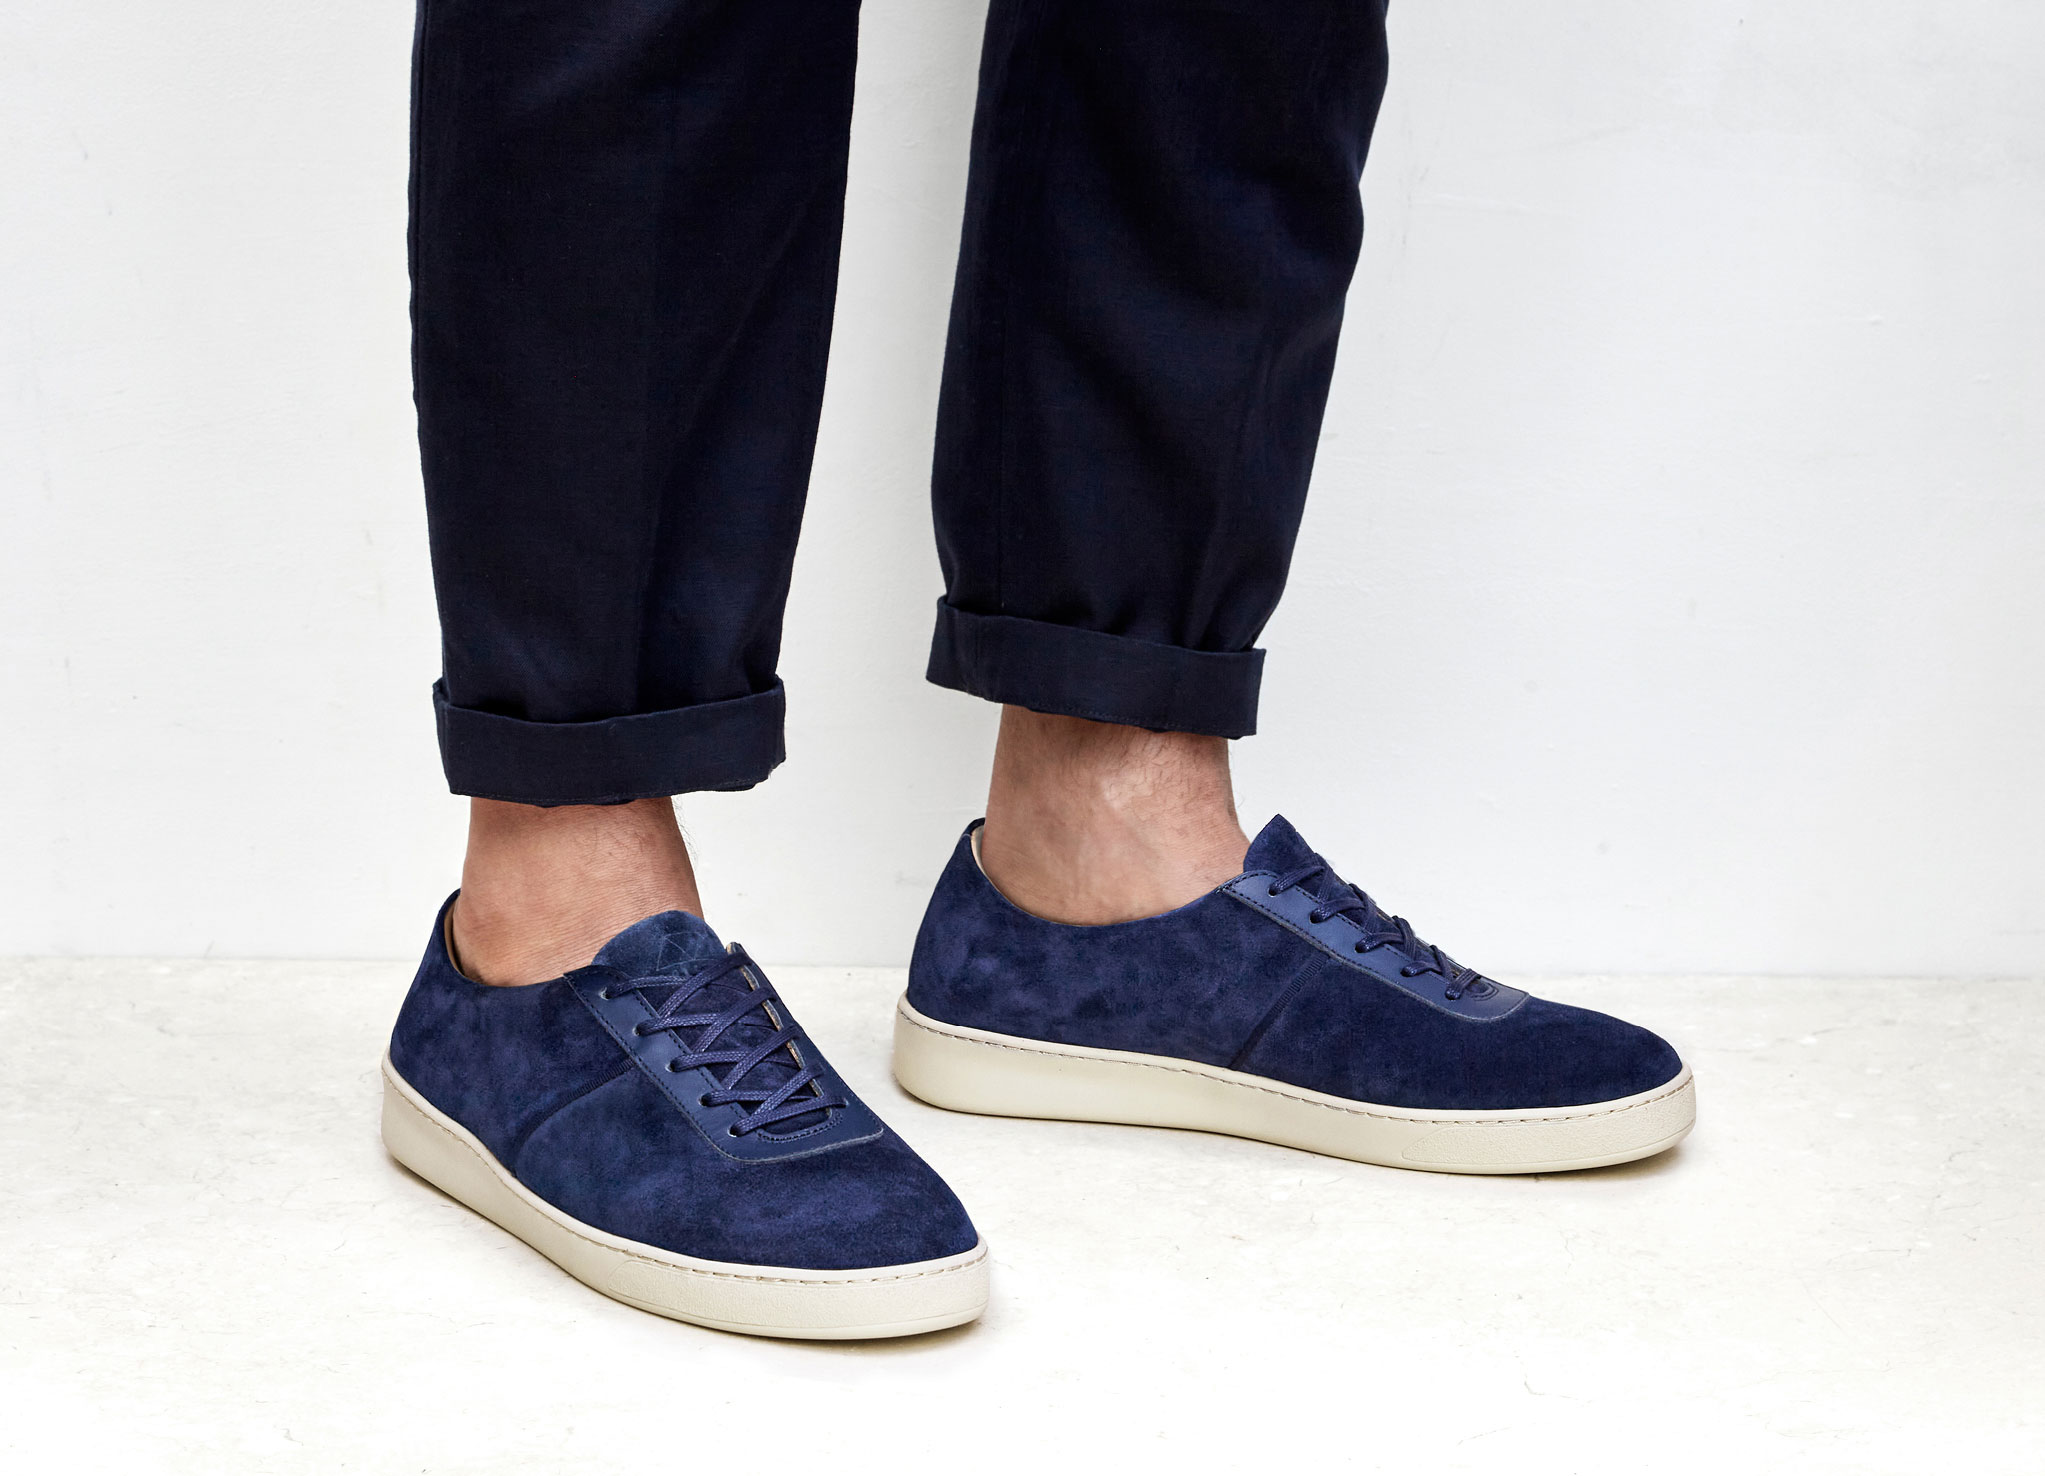 Blue Sneakers for Men | MULO Shoes | High-quality Navy Suede